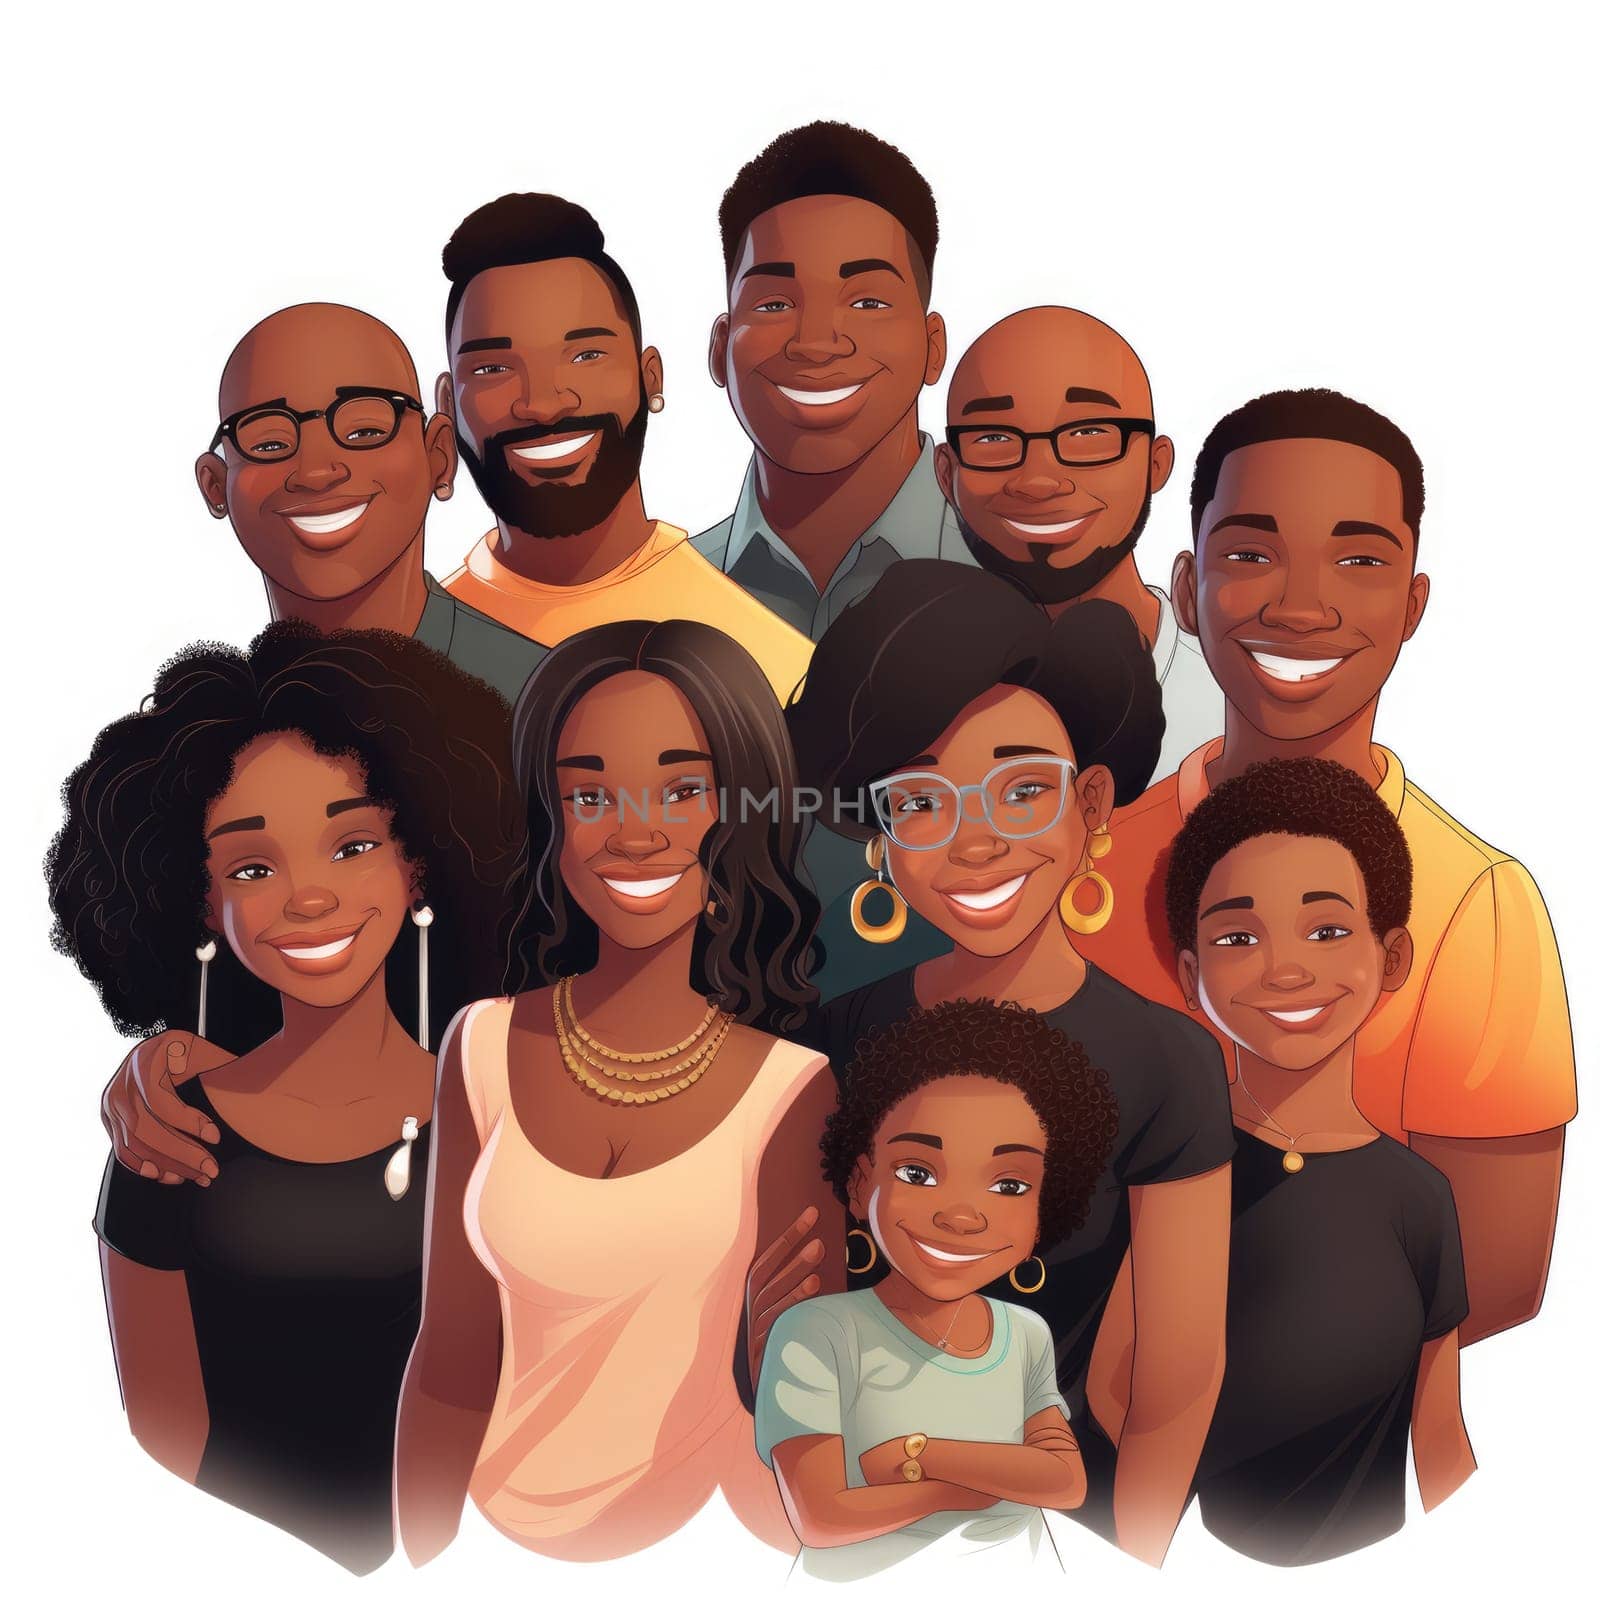 Multi-Generation African American Family In sketch style on white, AI Generated by Desperada